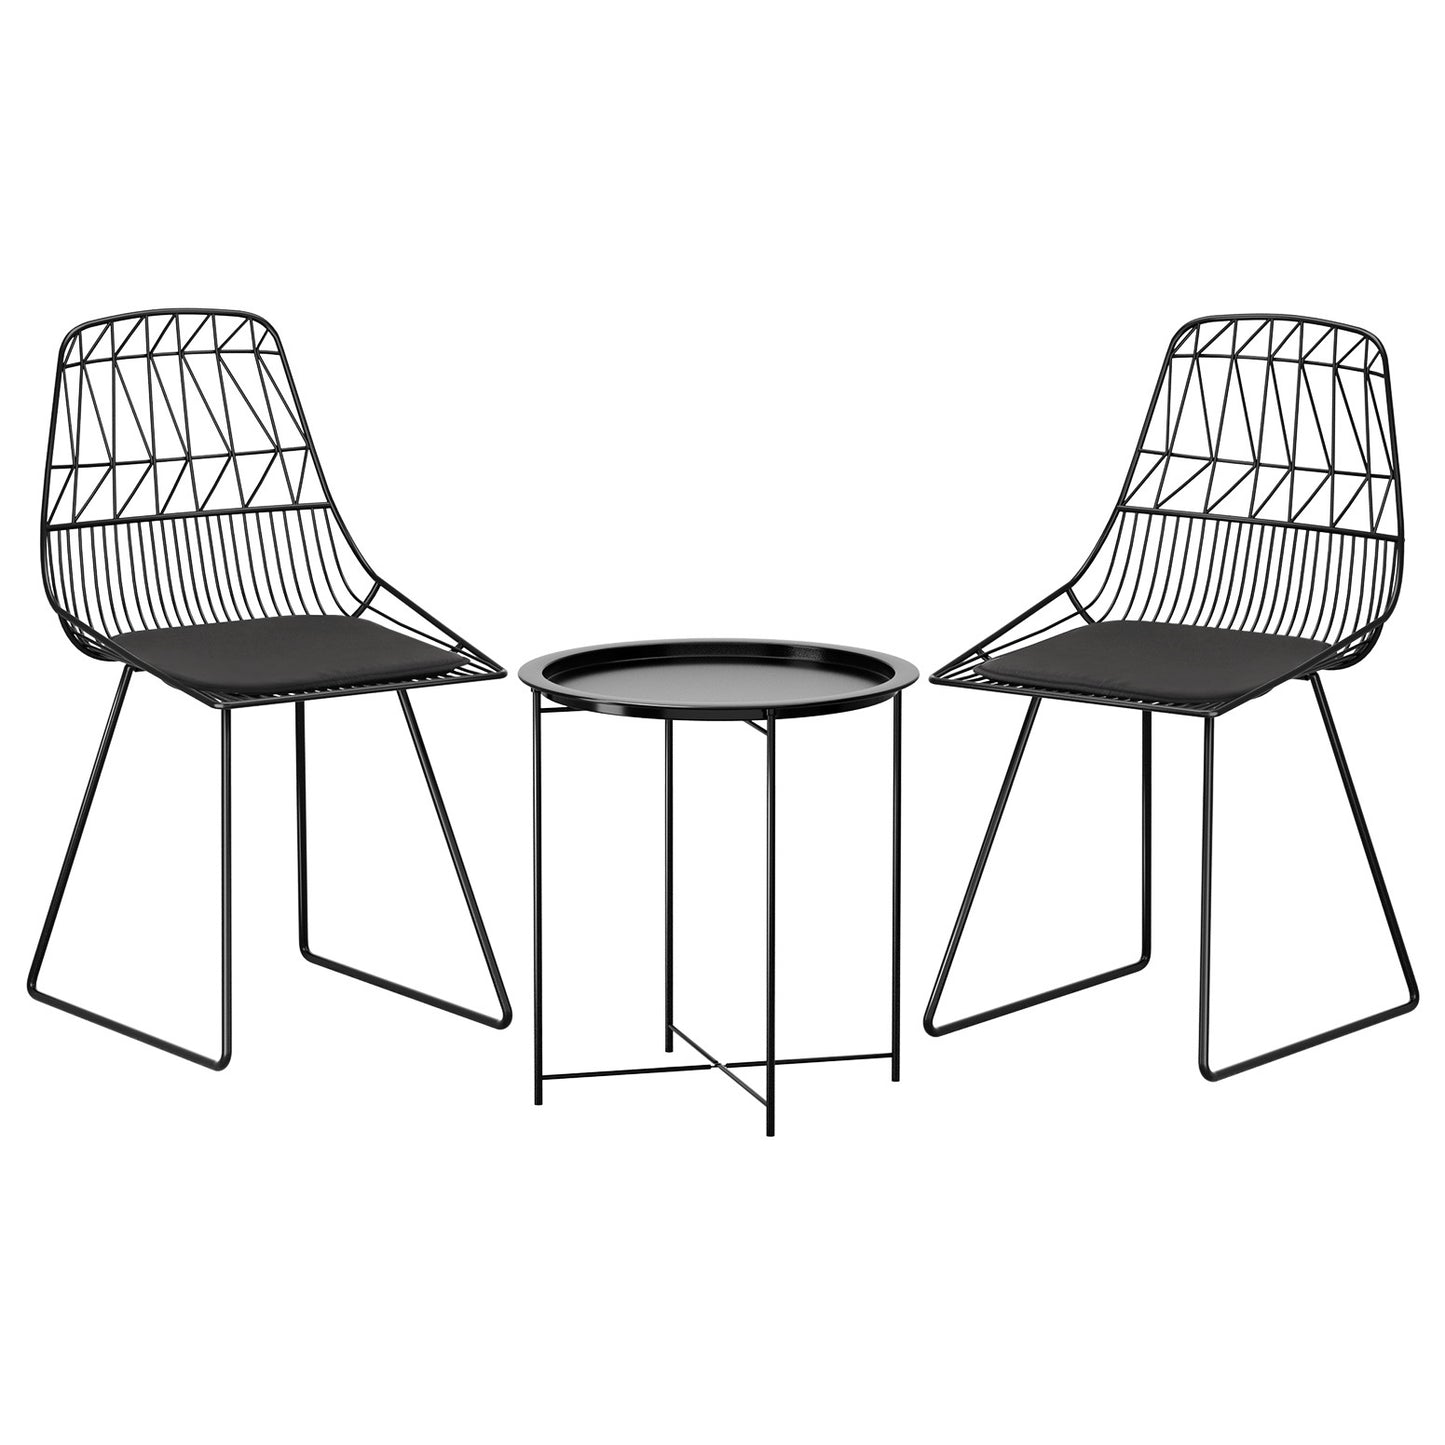 Ambrose 2-Seater Patio Furniture Lounge Chairs Table Garden Set of 3 Outdoor Bistro Set - Black